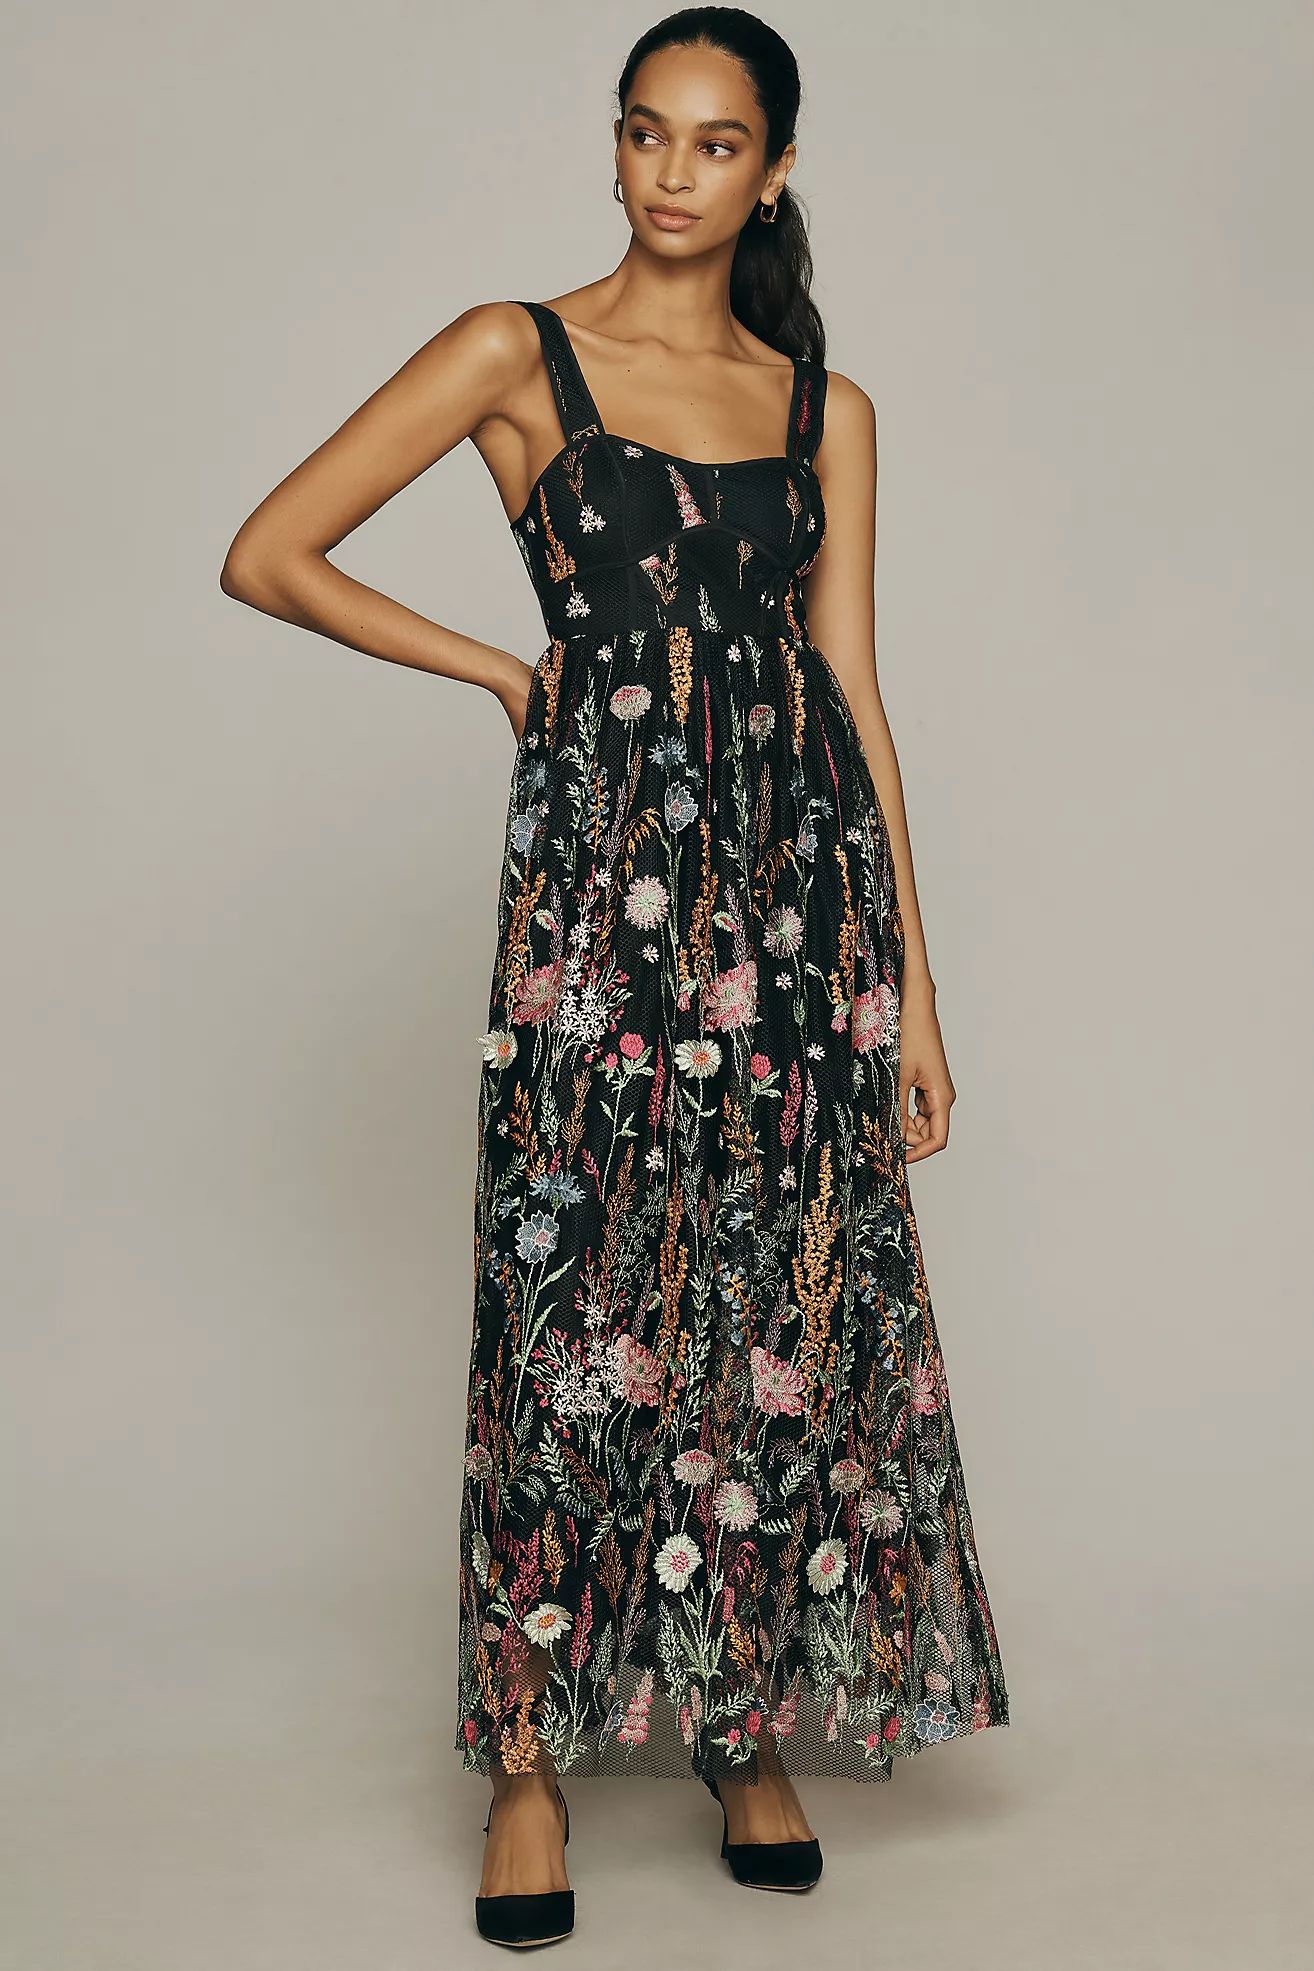 By Anthropologie Sheer Floral Embroidered Mesh Midi Dress | Anthropologie (US)